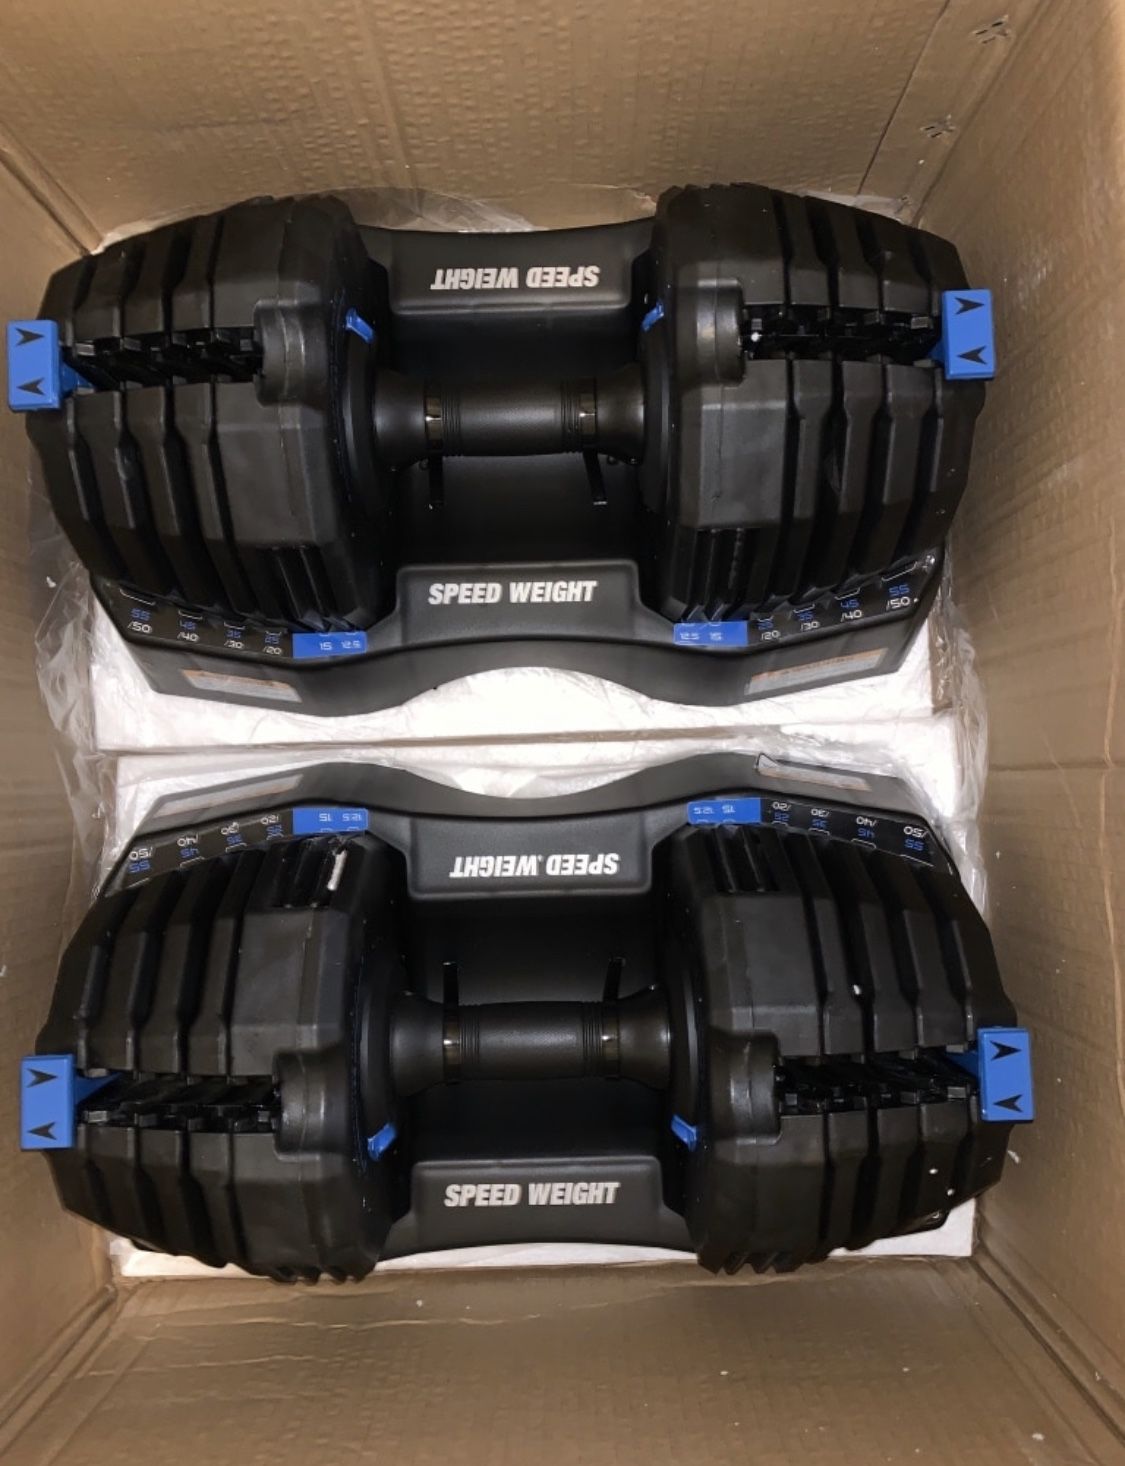 50 lbs Adjustable Dumbbells weights NordicTrack BRAND NEW Compare with Bowflex